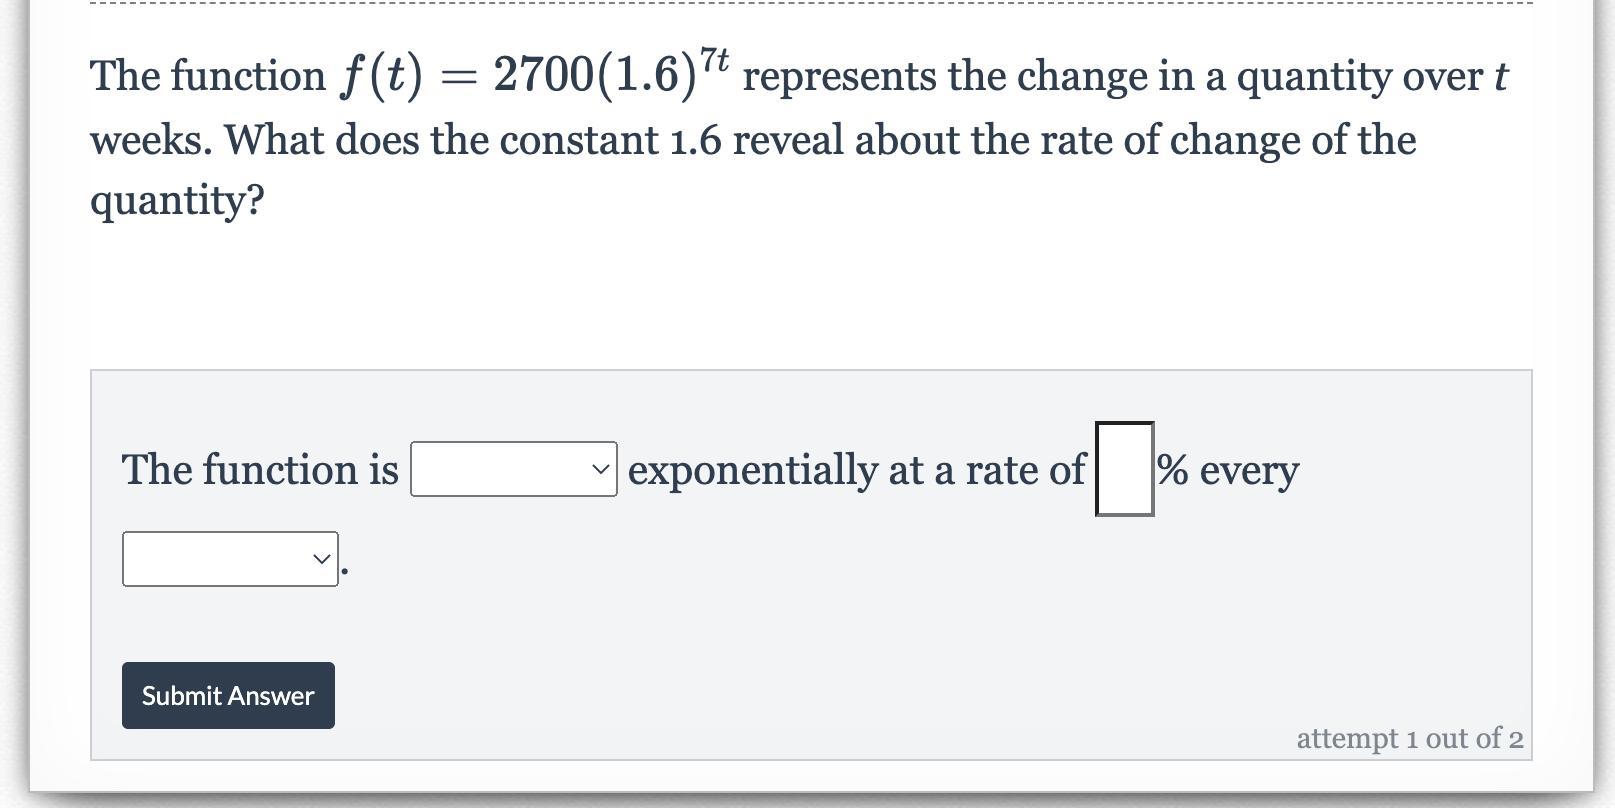 What Does The Constant 1.6 Reveal About The Rate Of Change Of The Quantity?